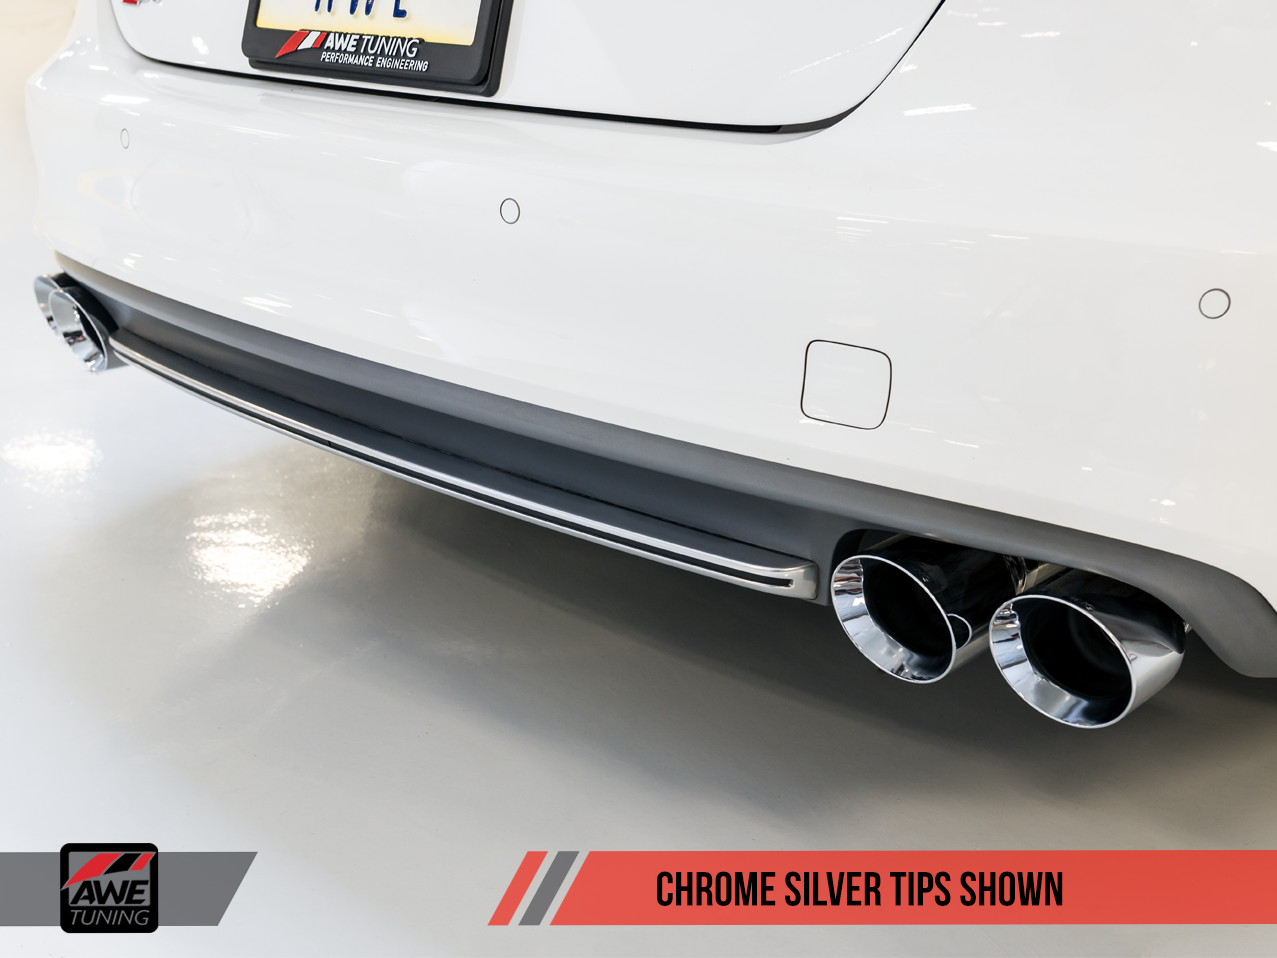 AWE Touring Edition Exhaust for Audi C7 S7 4.0T - Motorsports LA